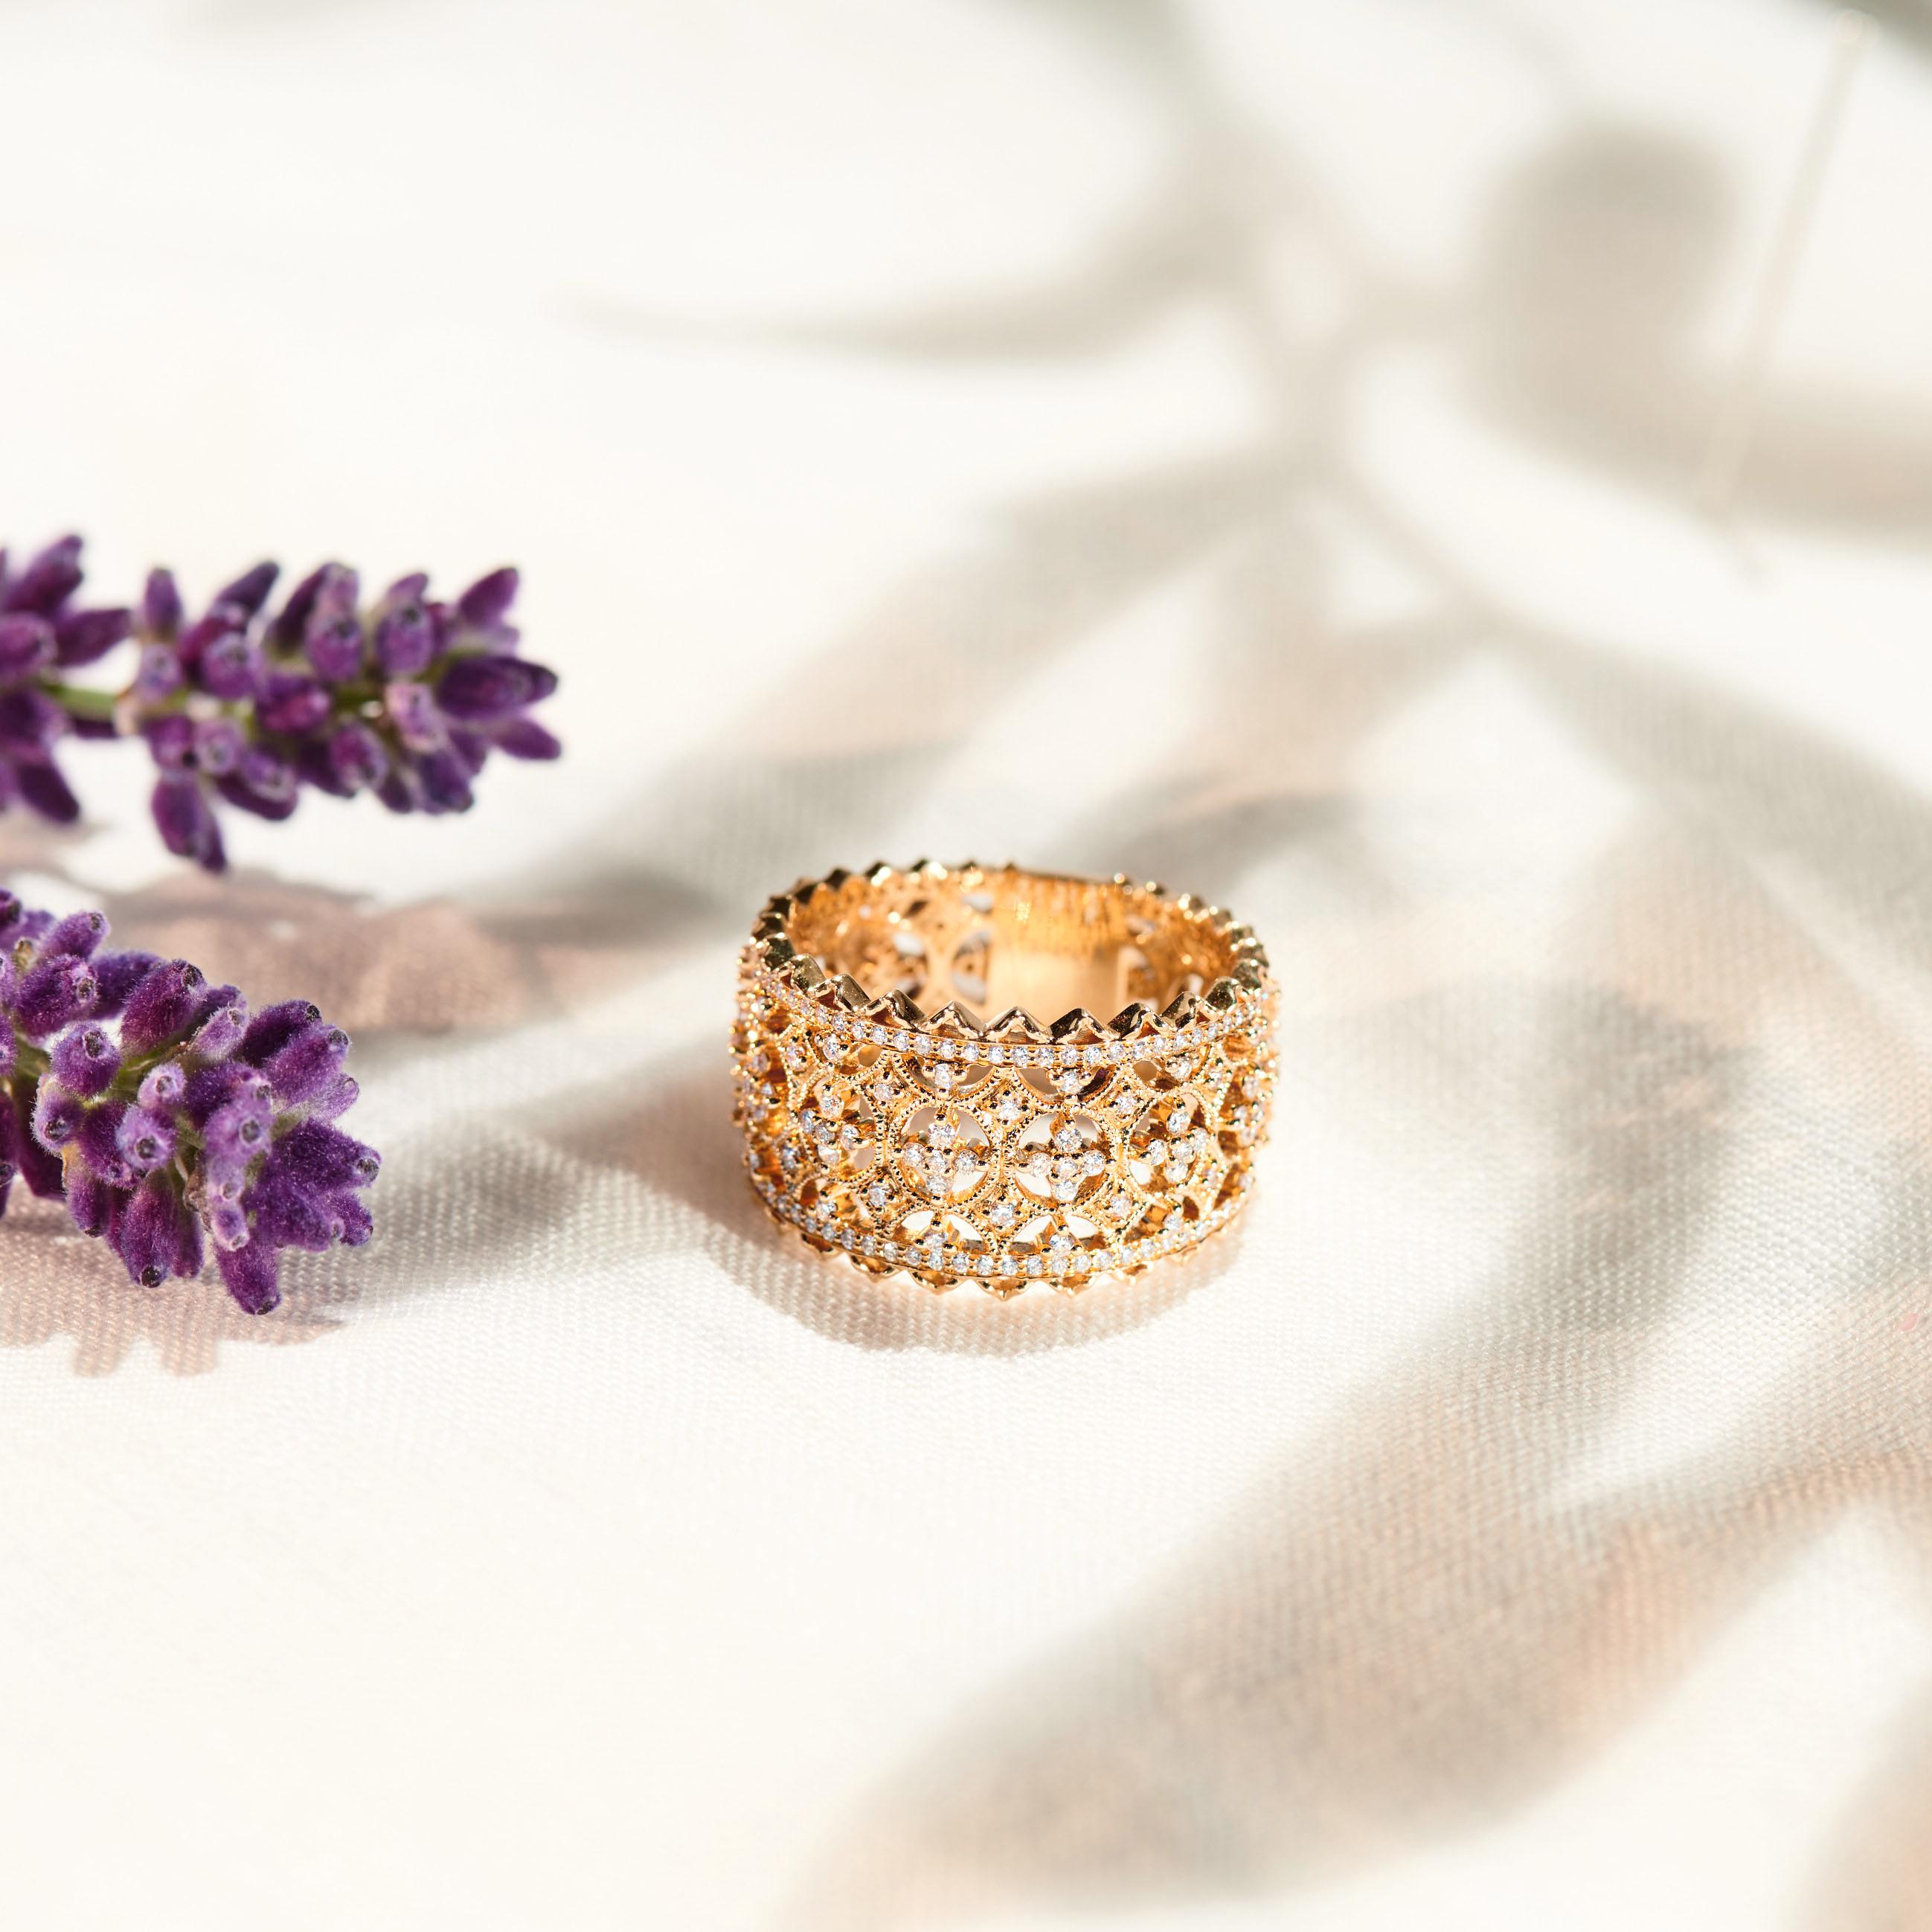 For Sale:  18k Yellow Gold Lace Band Ring With 1.10 Carats Of Diamonds Milgrain Setting 4